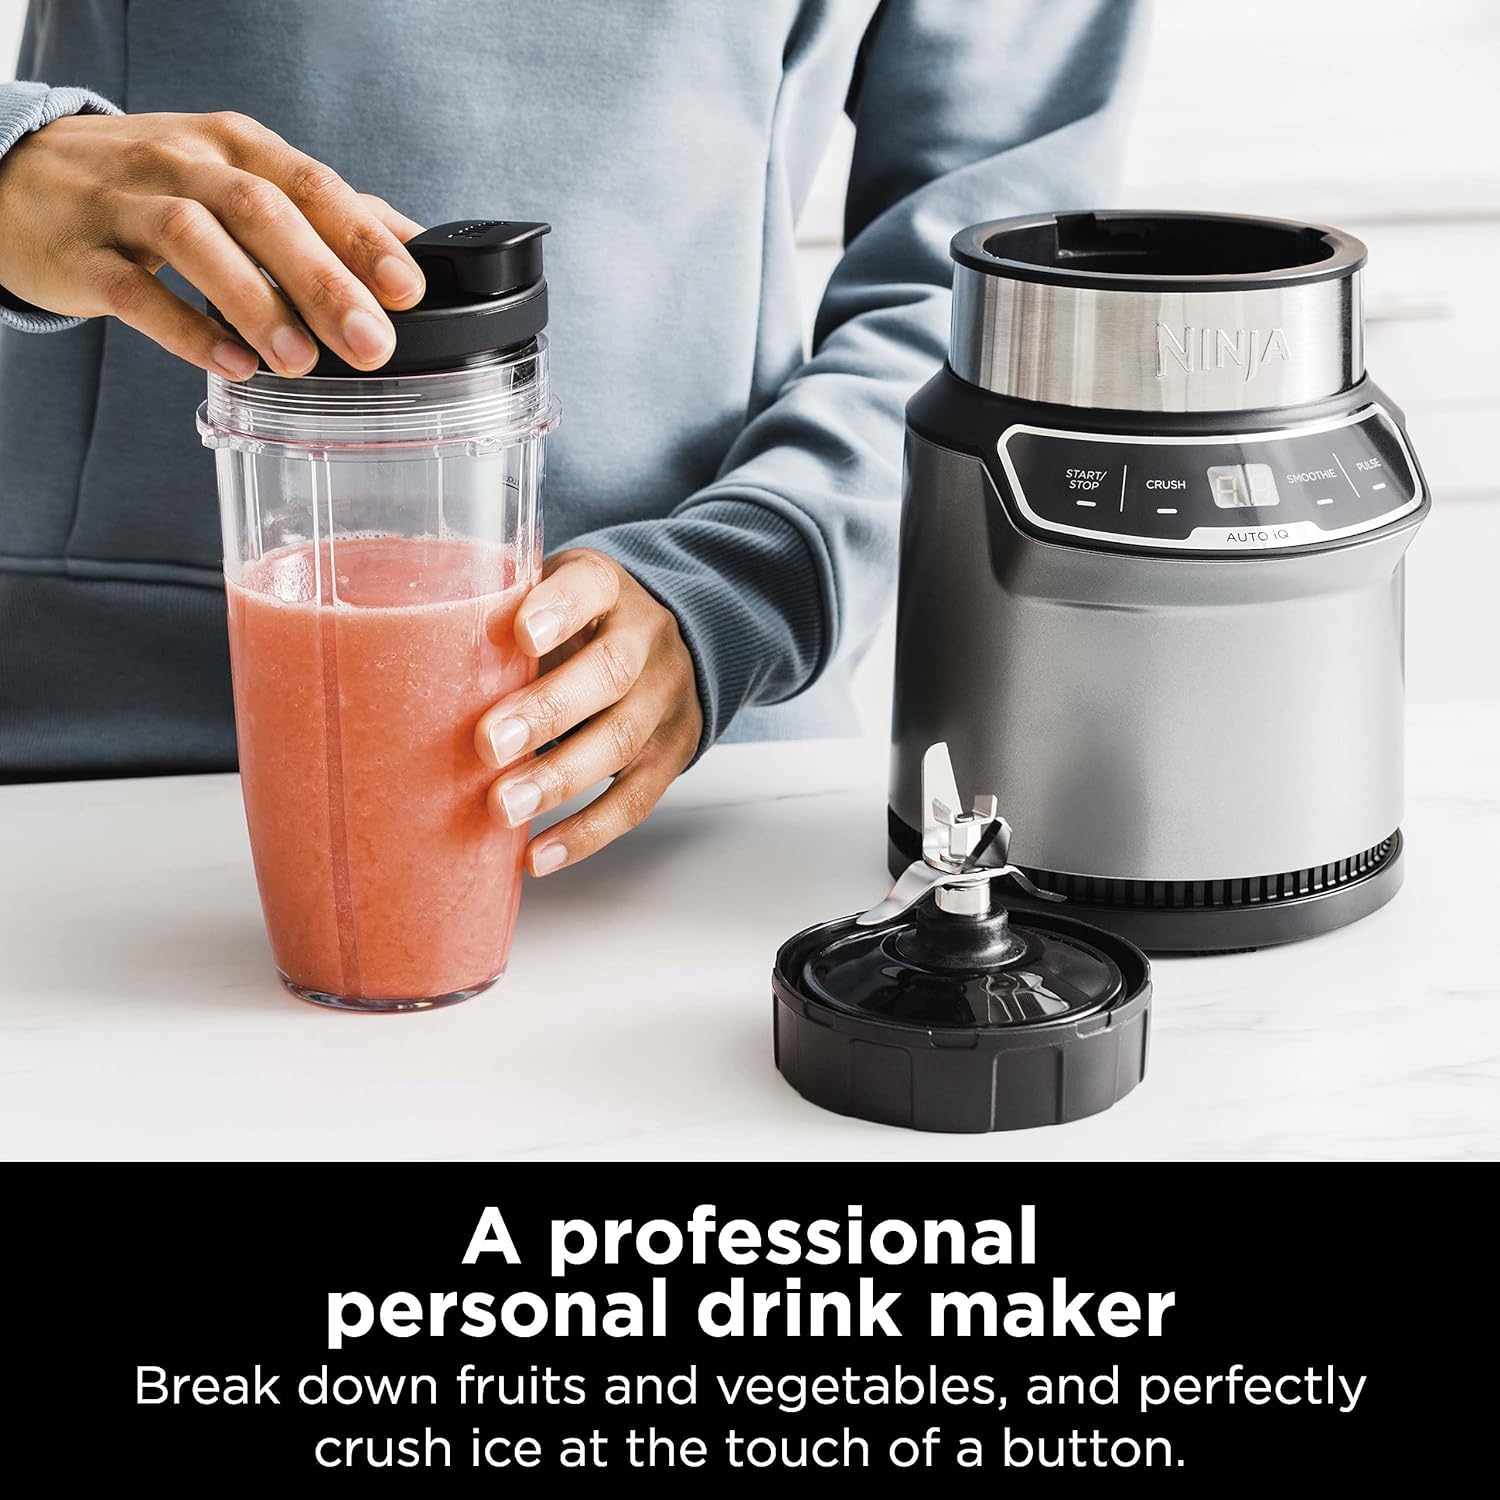 Ninja BN401 Nutri Pro Compact Personal Blender, Auto-iQ Technology, 1100-Peak-Watts, for Frozen Drinks, Smoothies, Sauces  More, with (2) 24-oz. To-Go Cups  Spout Lids, Cloud Silver